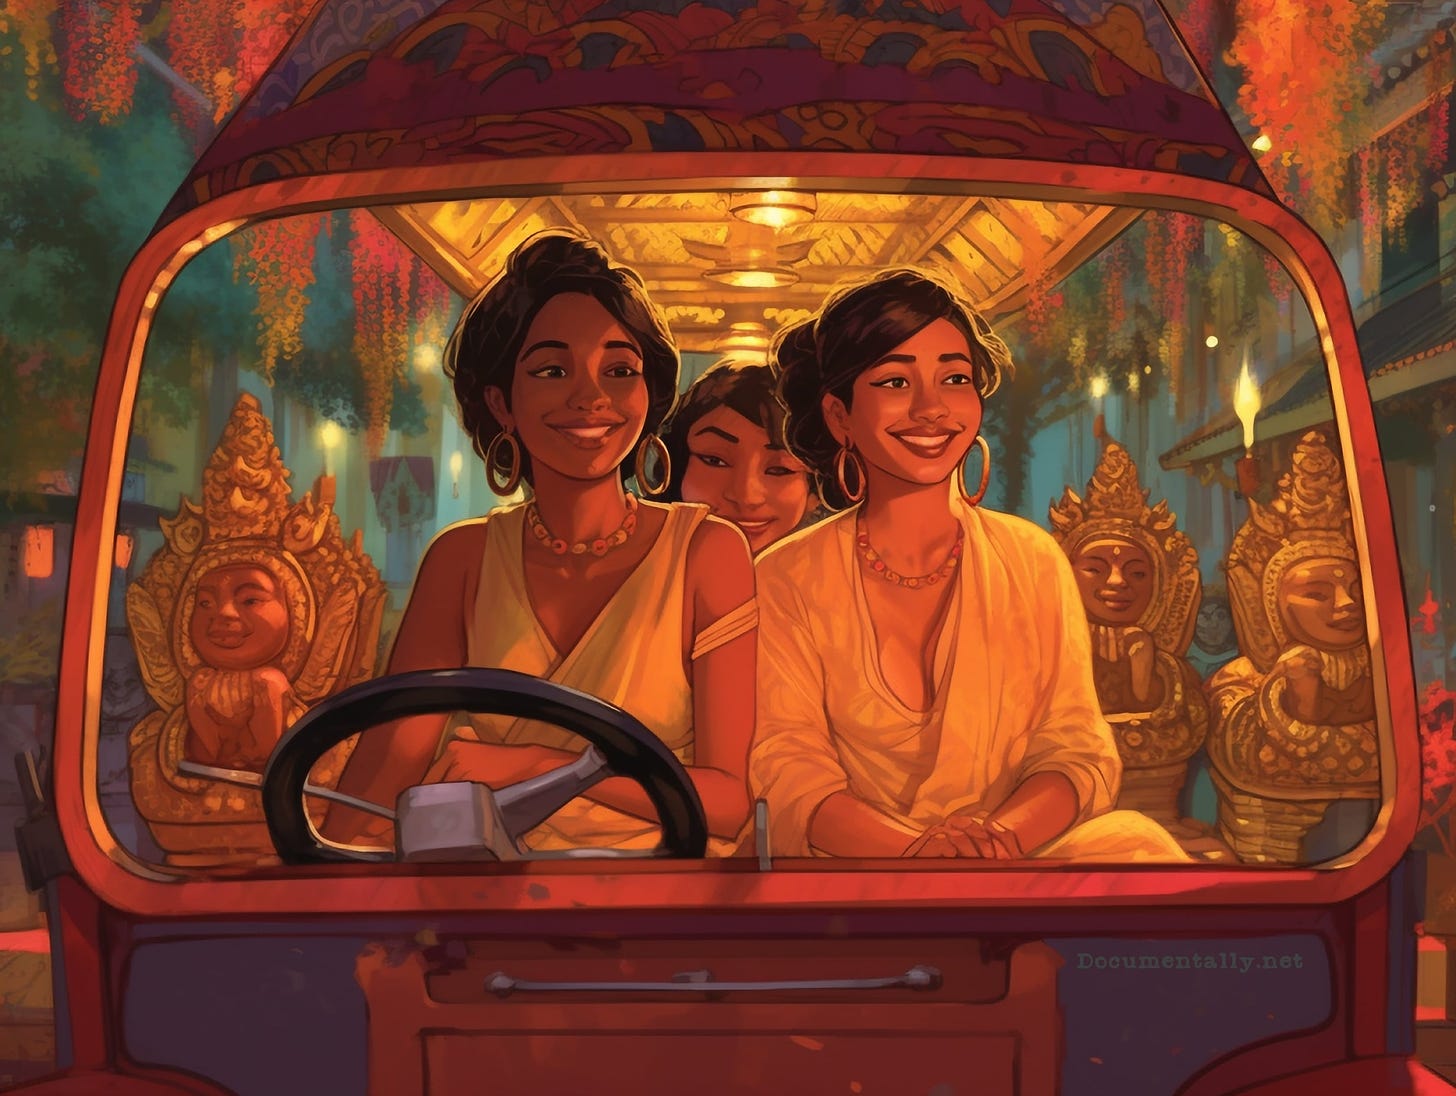 A cartoon style illustration of three ladies, who might be from India, sitting in a right hand drive tuk tuks with three Buddhas visible behind them.